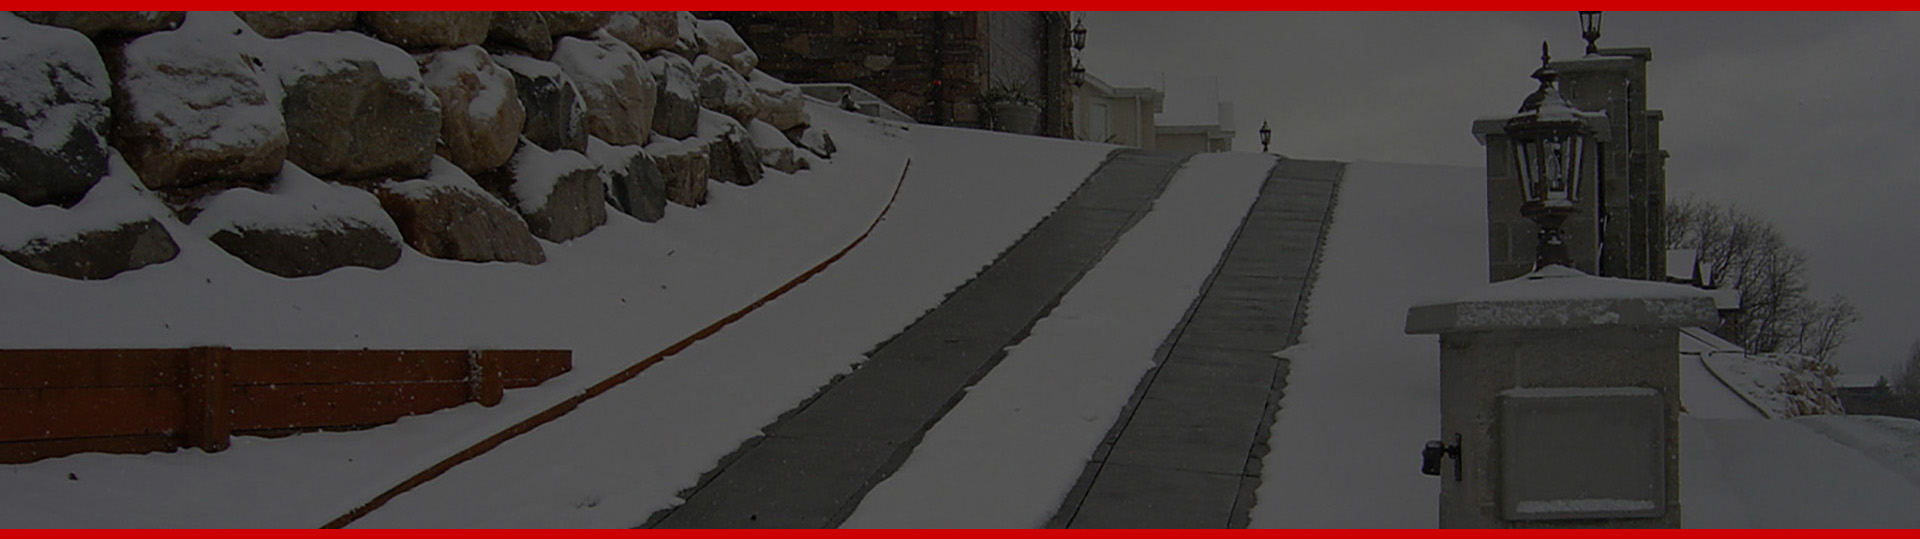 Radiant driveway heating systems banner.